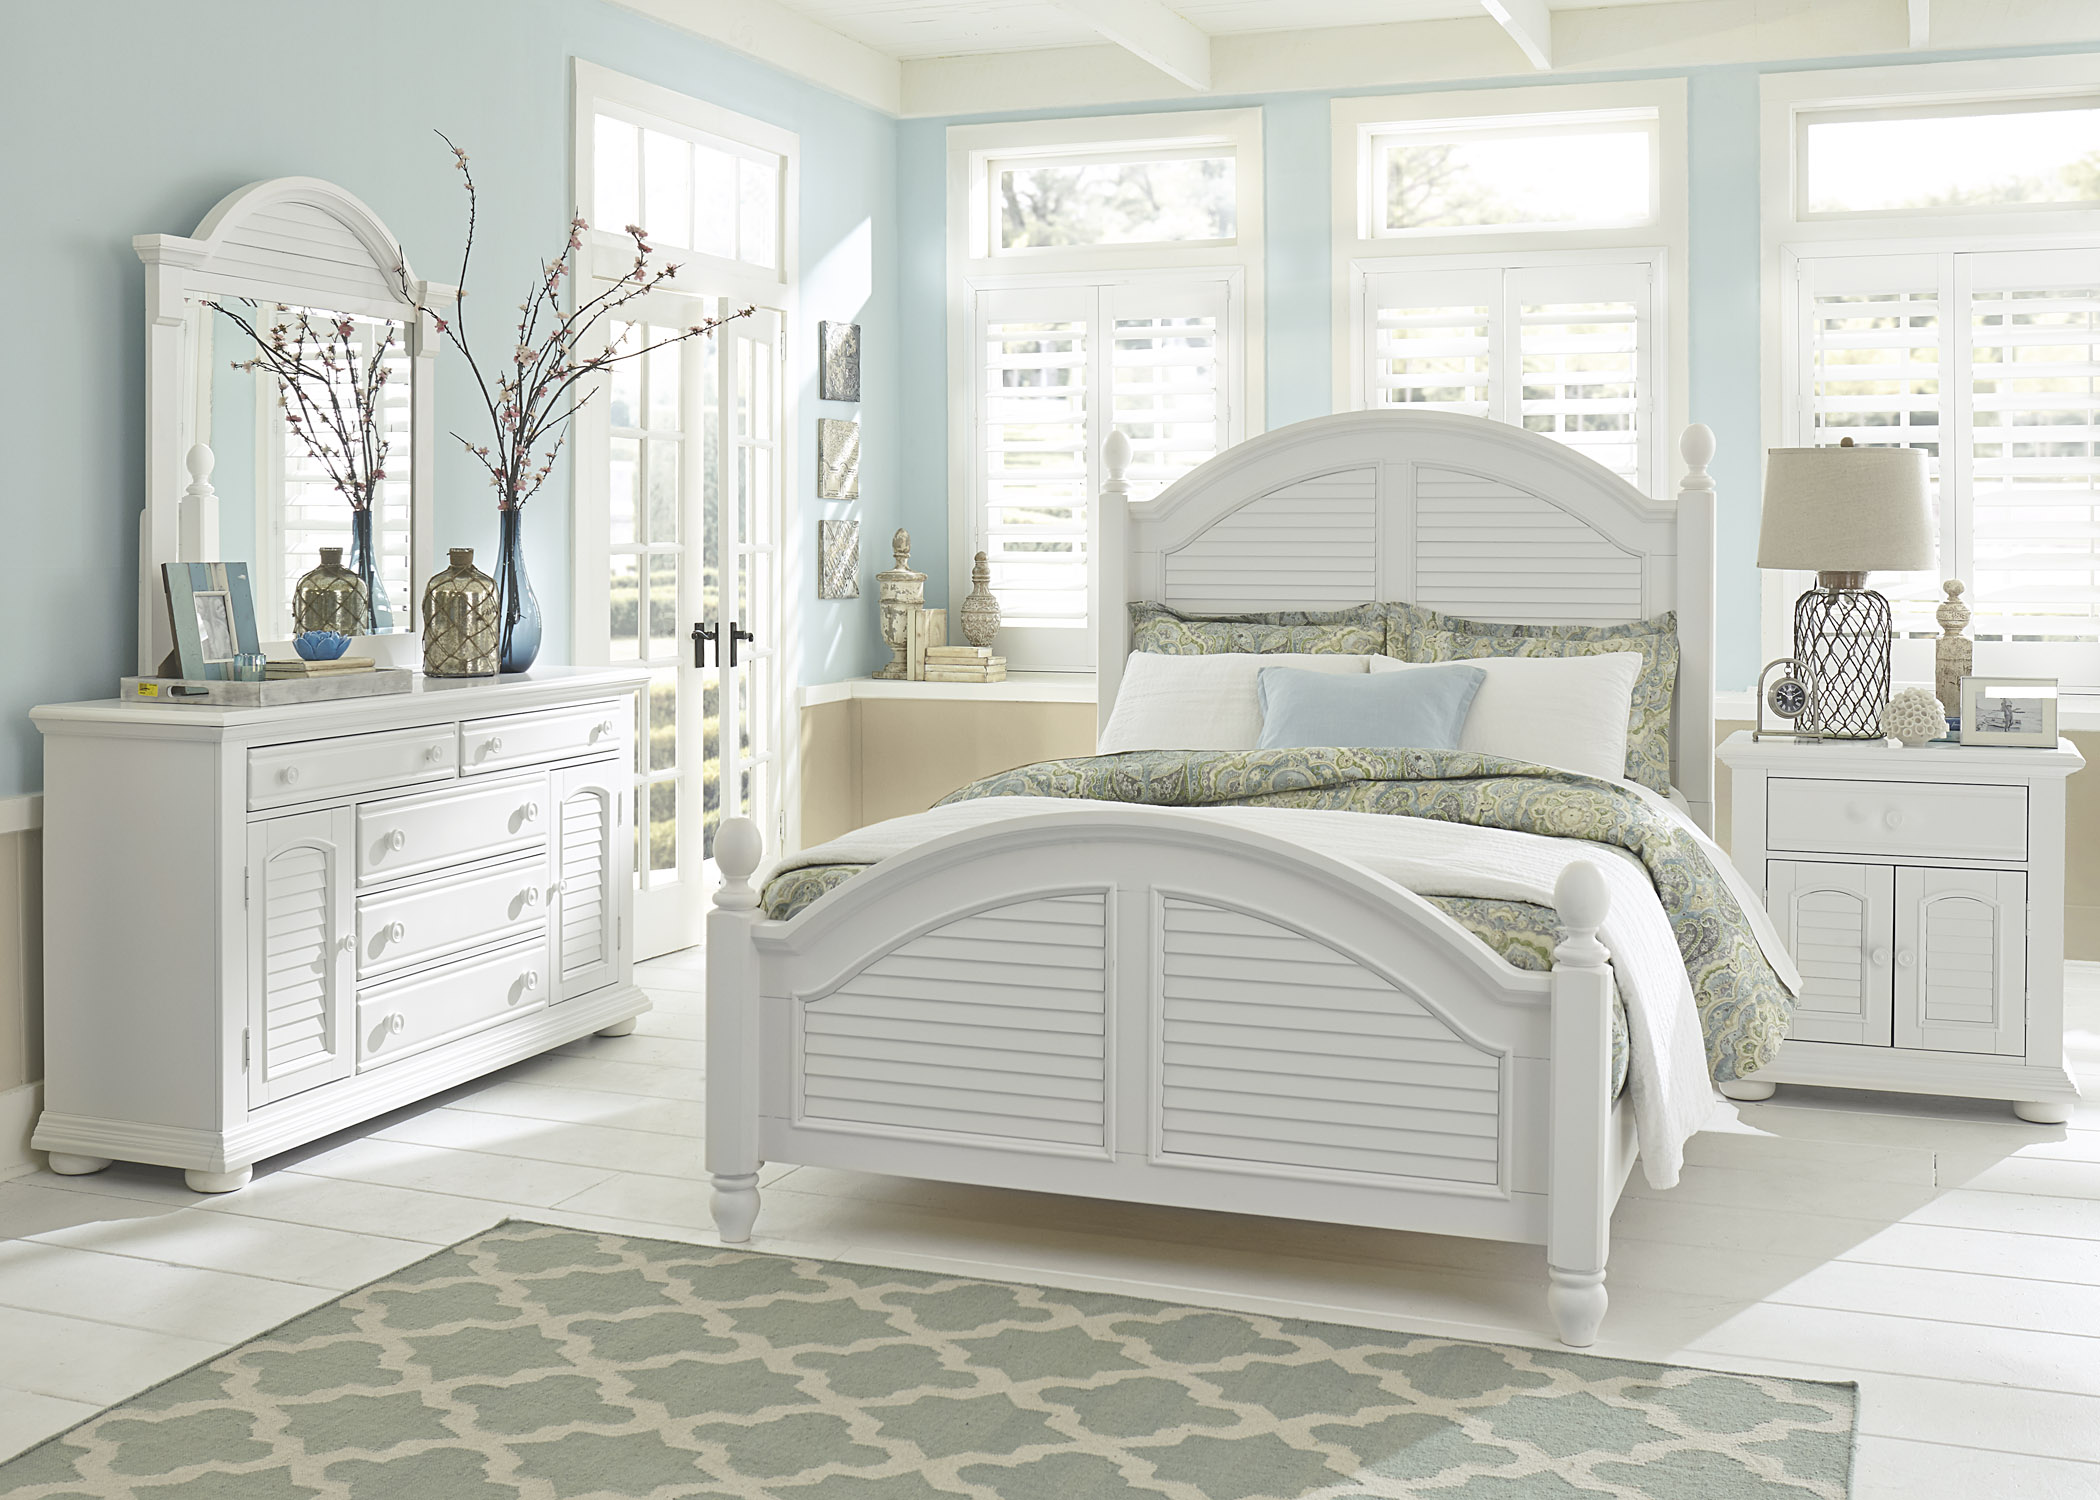 Liberty Furniture Summer House l Bedroom King Poster Bed, Dresser, Mirror and Night Stand Collection